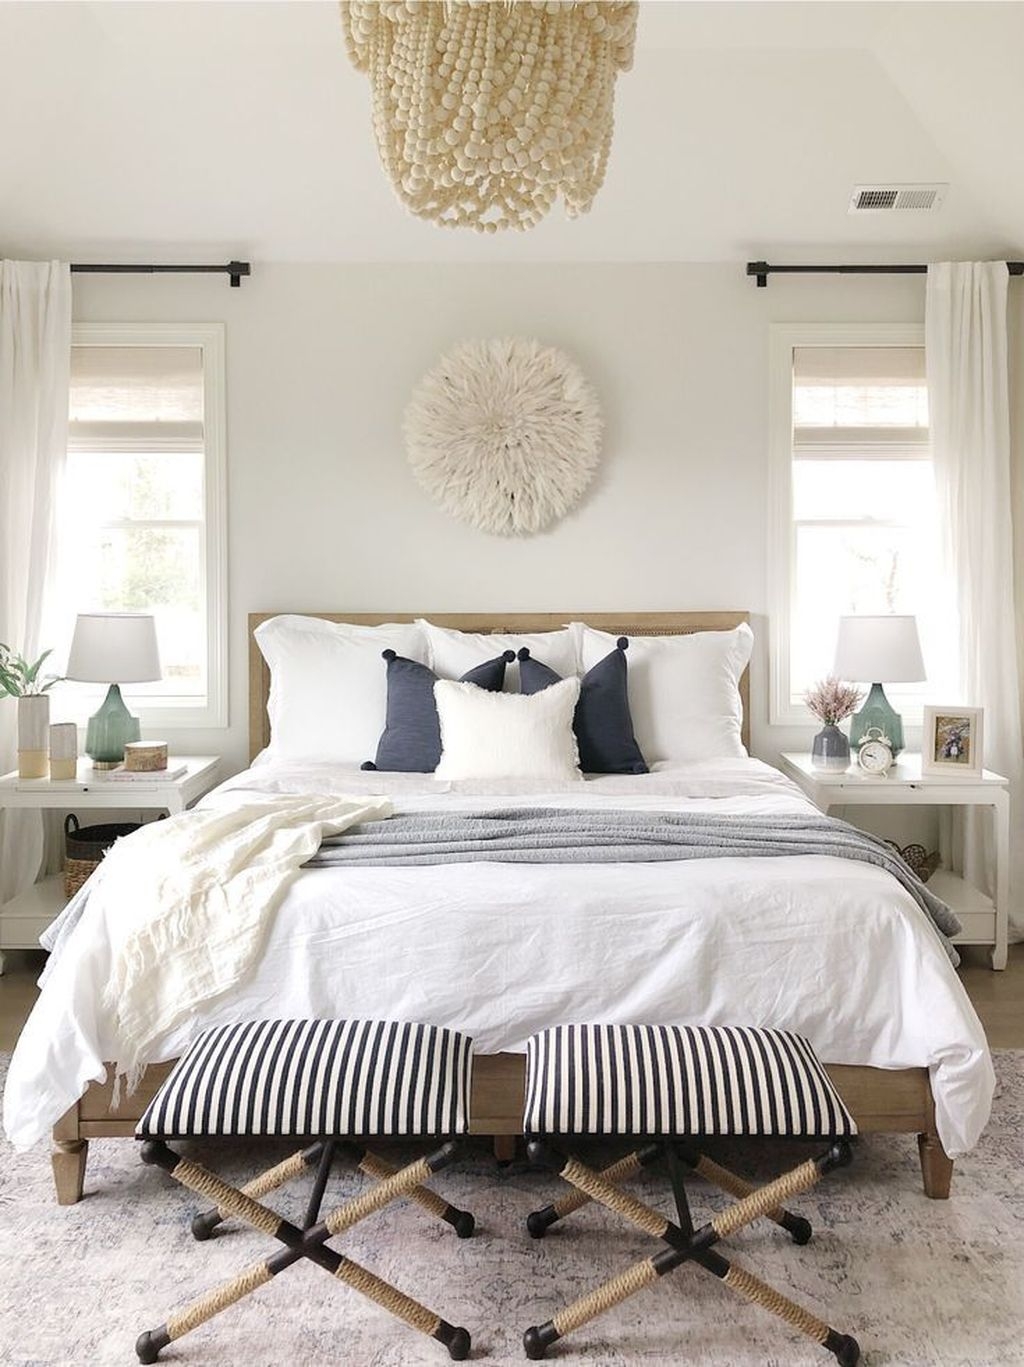 Affordable Rug Bedroom Decor Ideas To Try Right Now 47